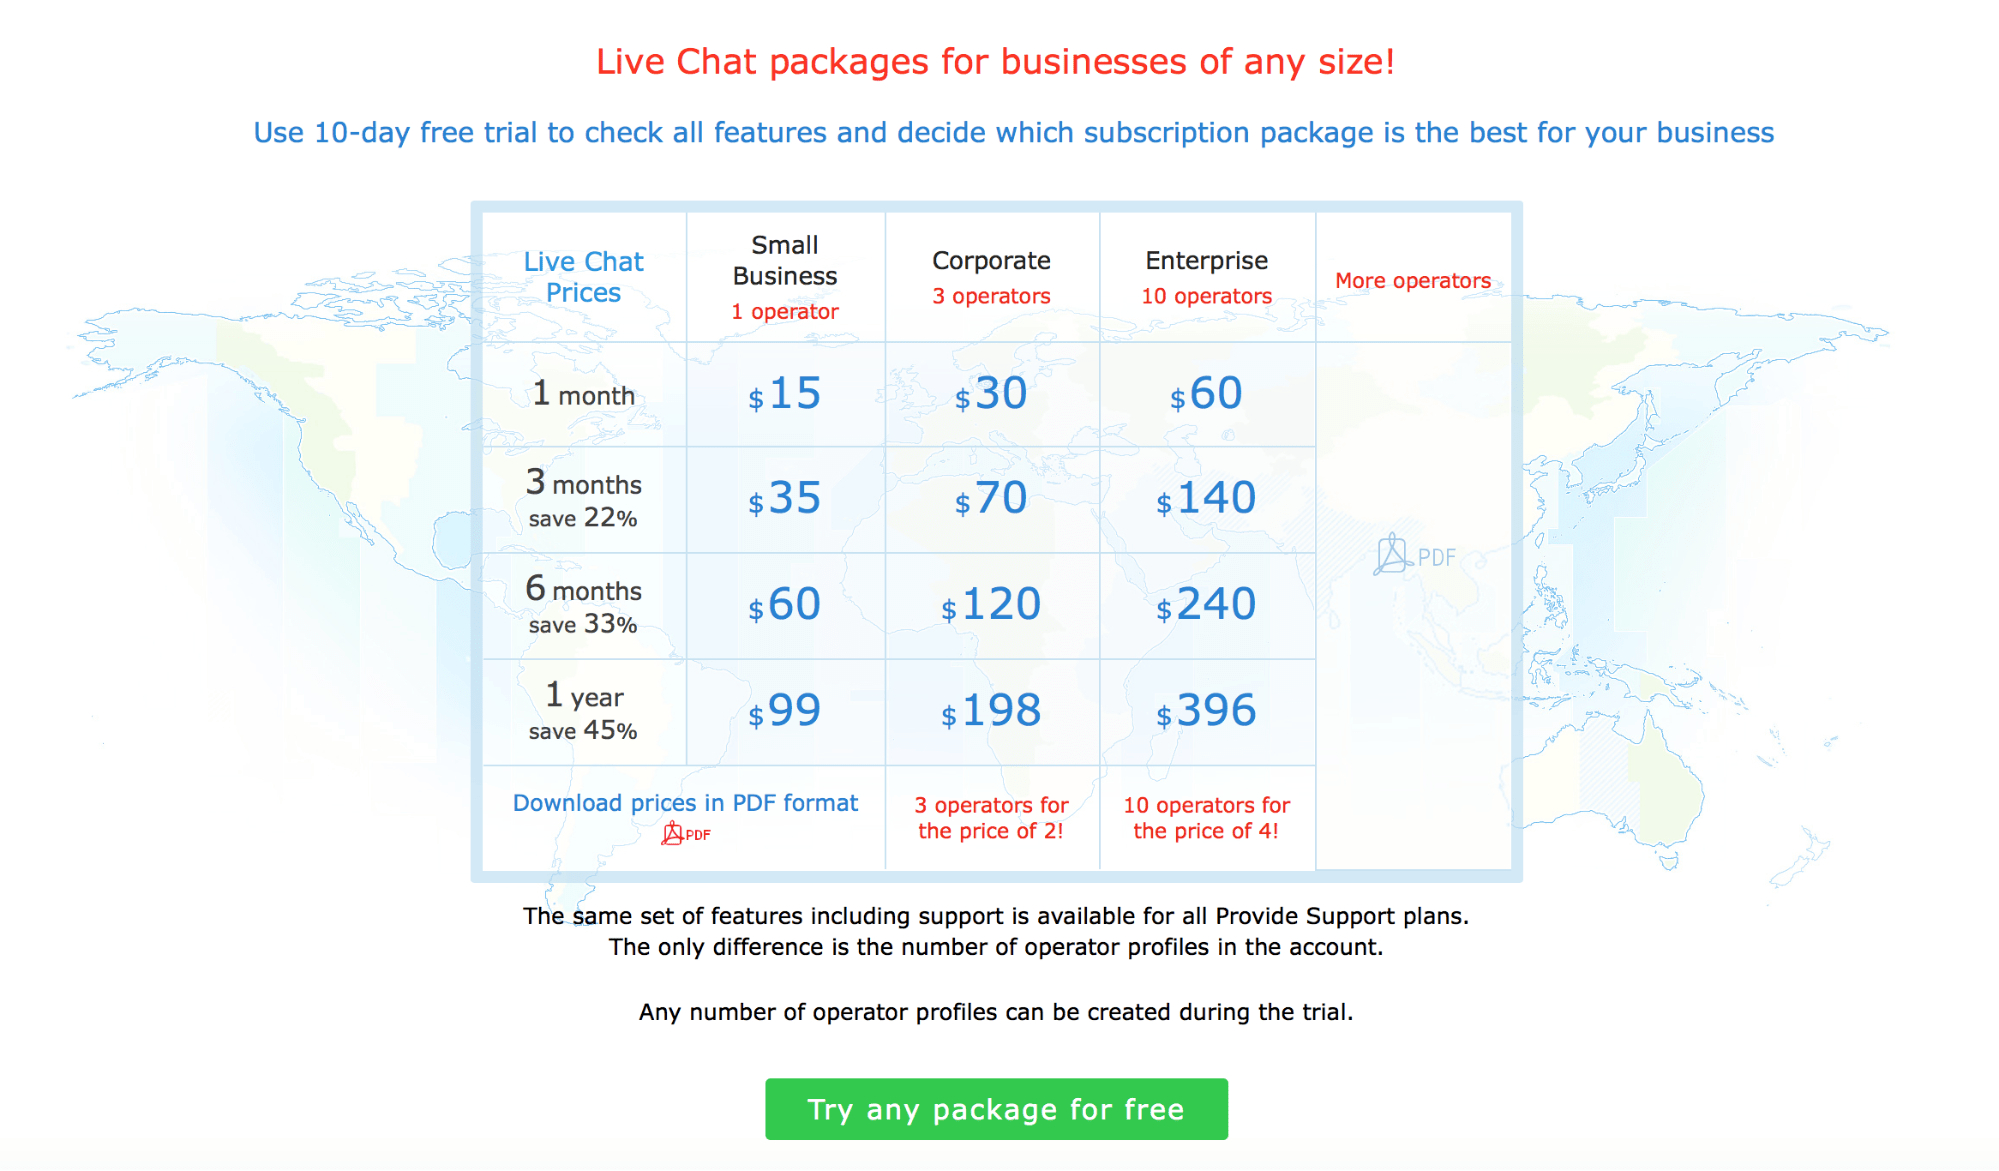 Provide Support pricing